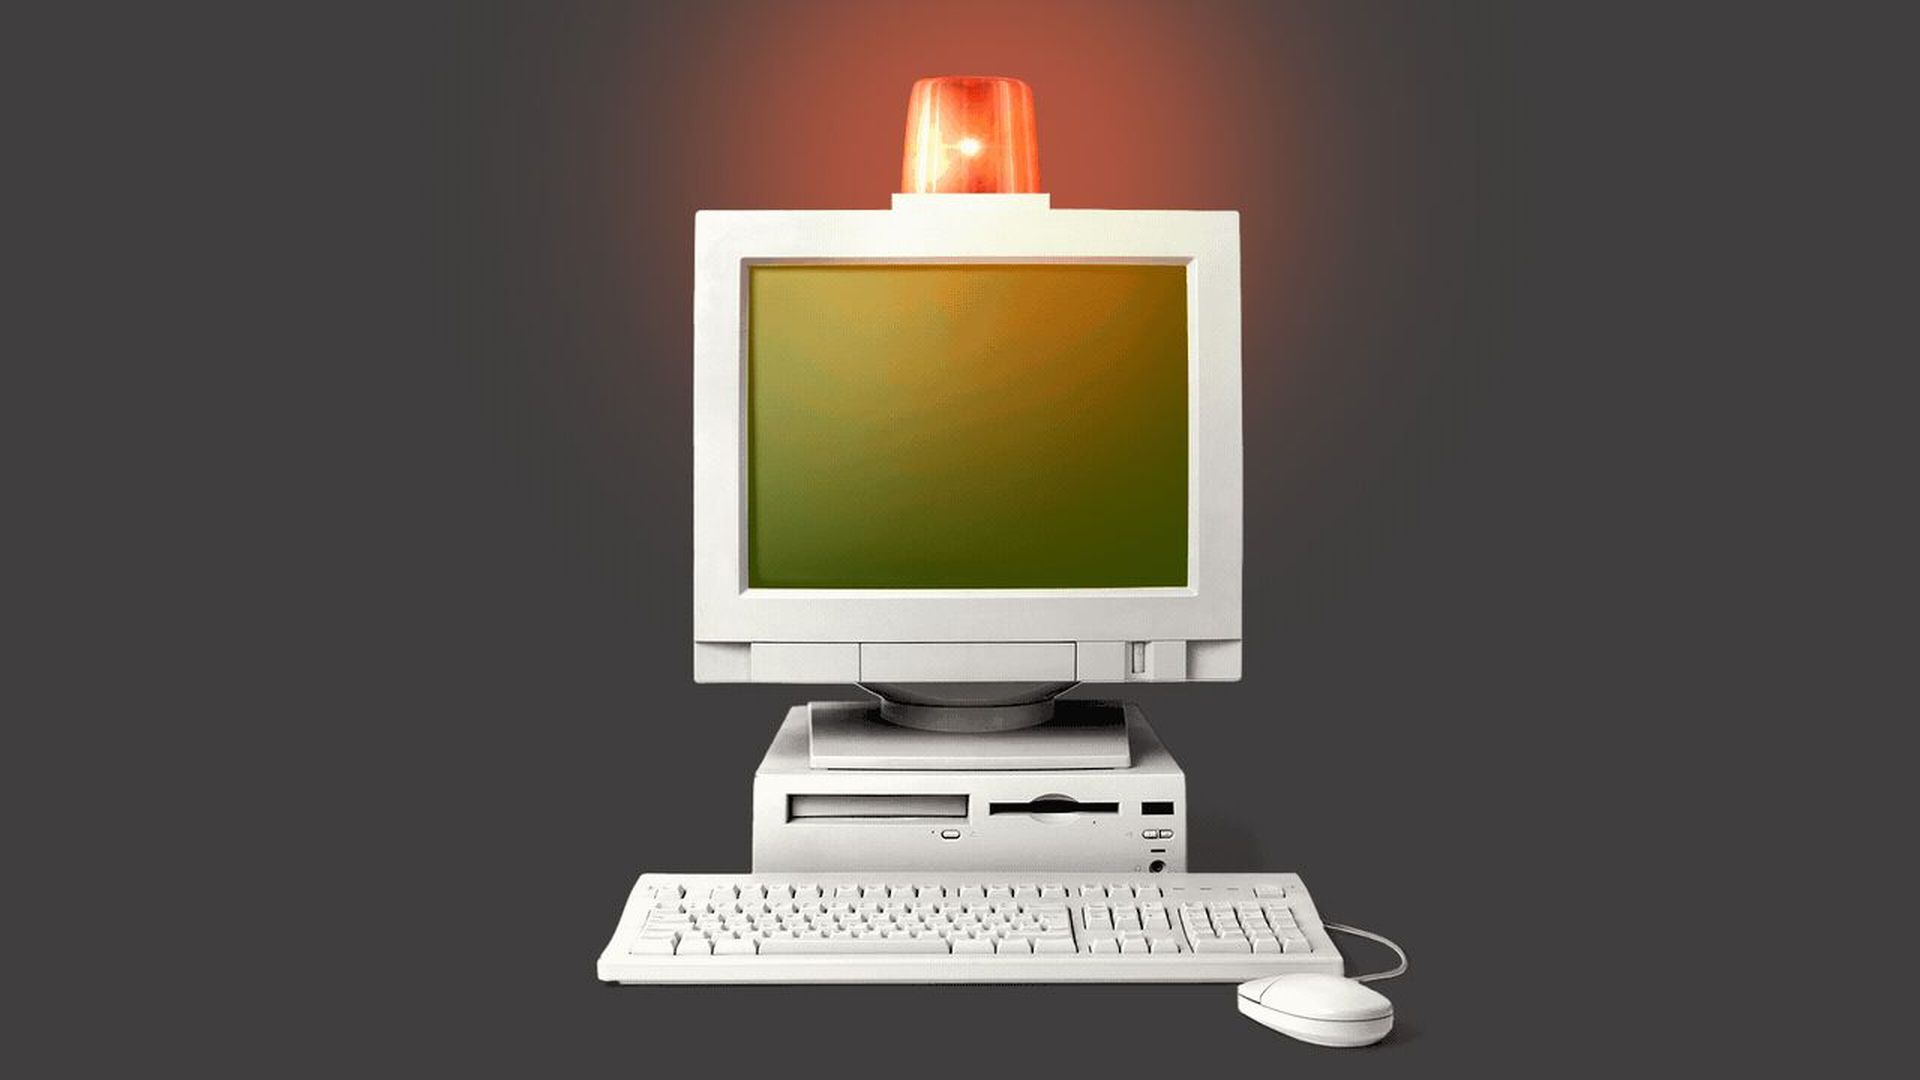 Illustration of a siren flashing on top of a computer.